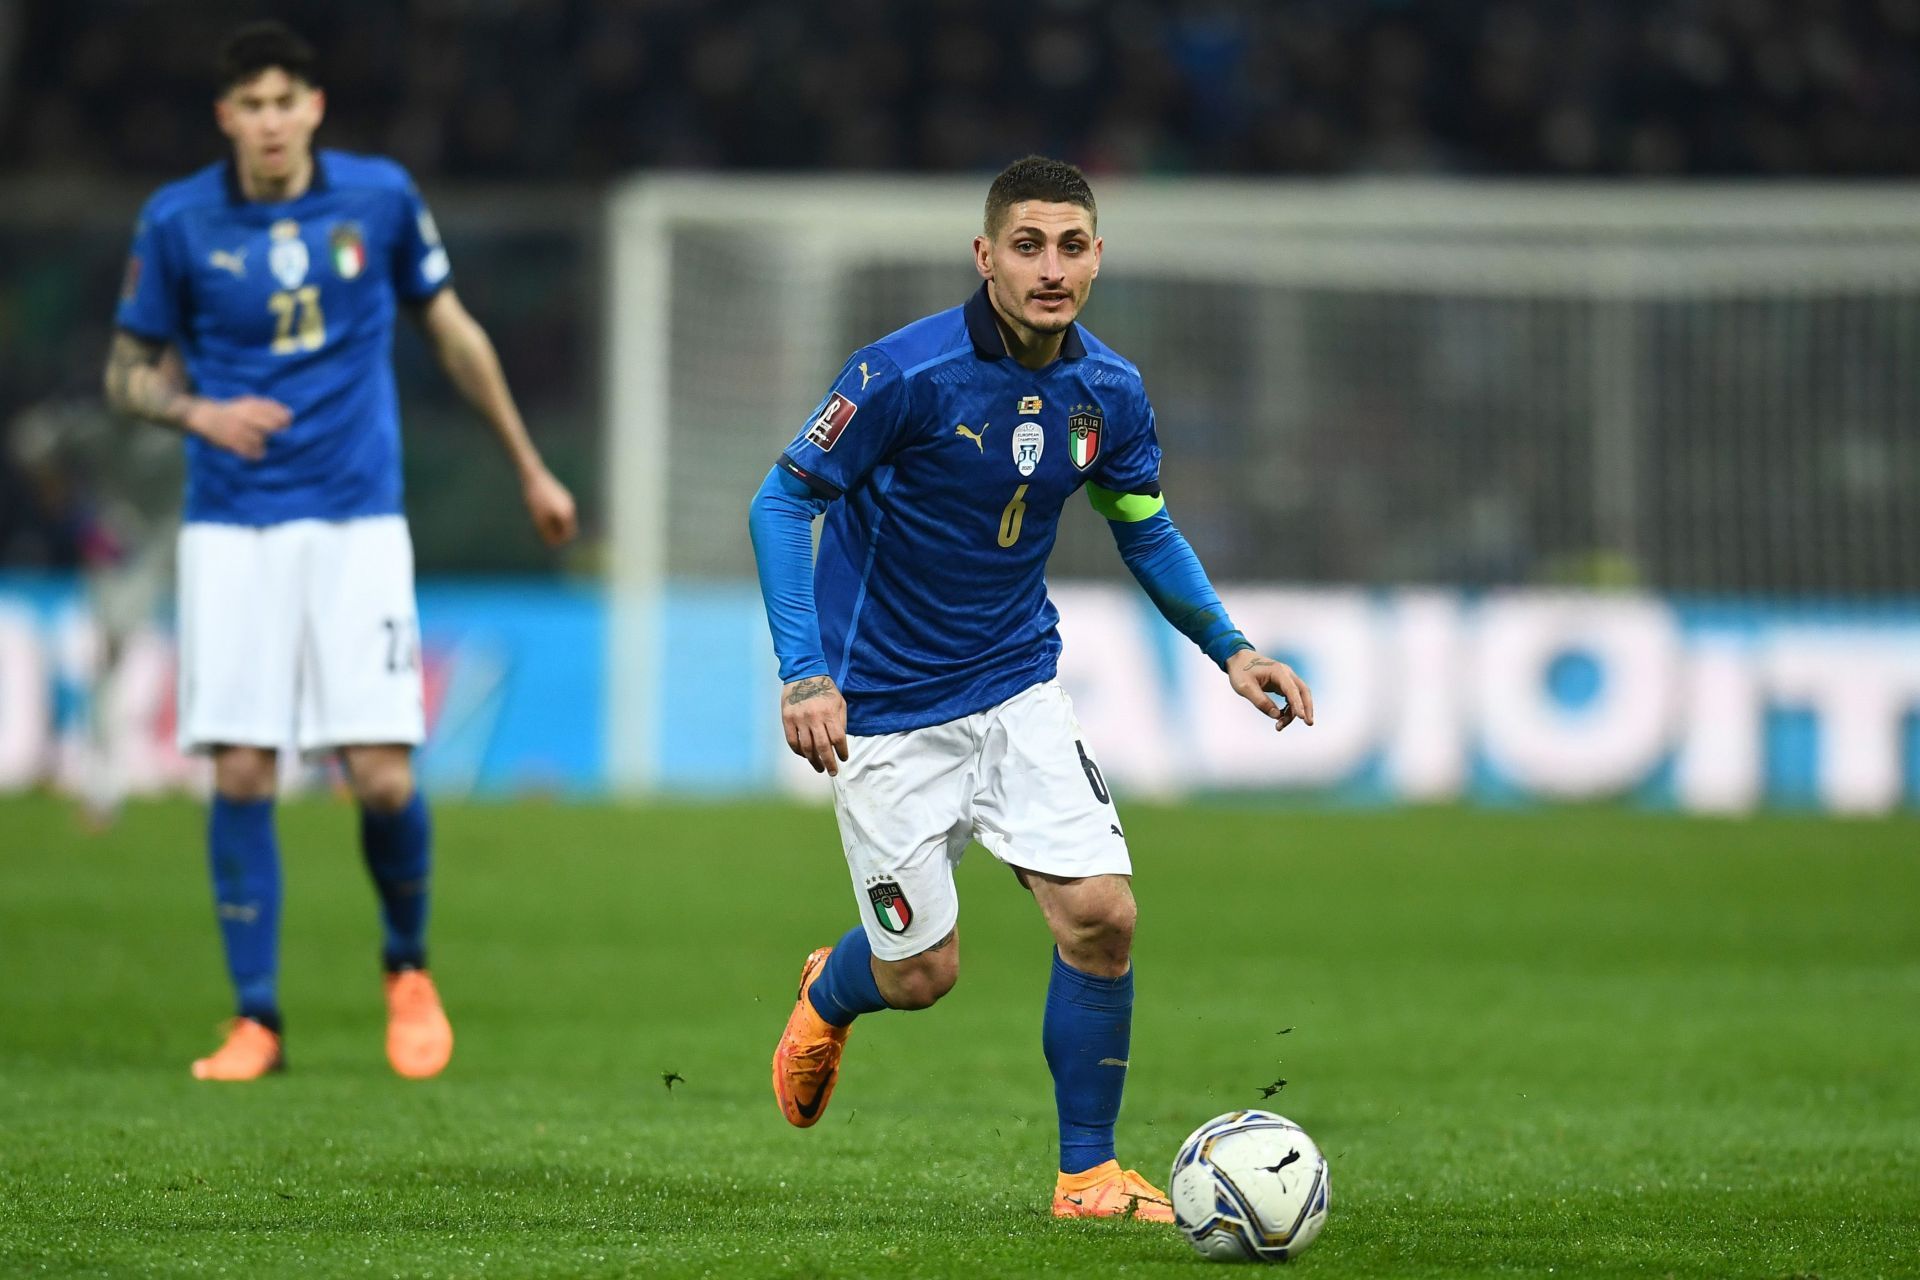 Marco Verratti is set to stay at the Parc des Princes for a long time.